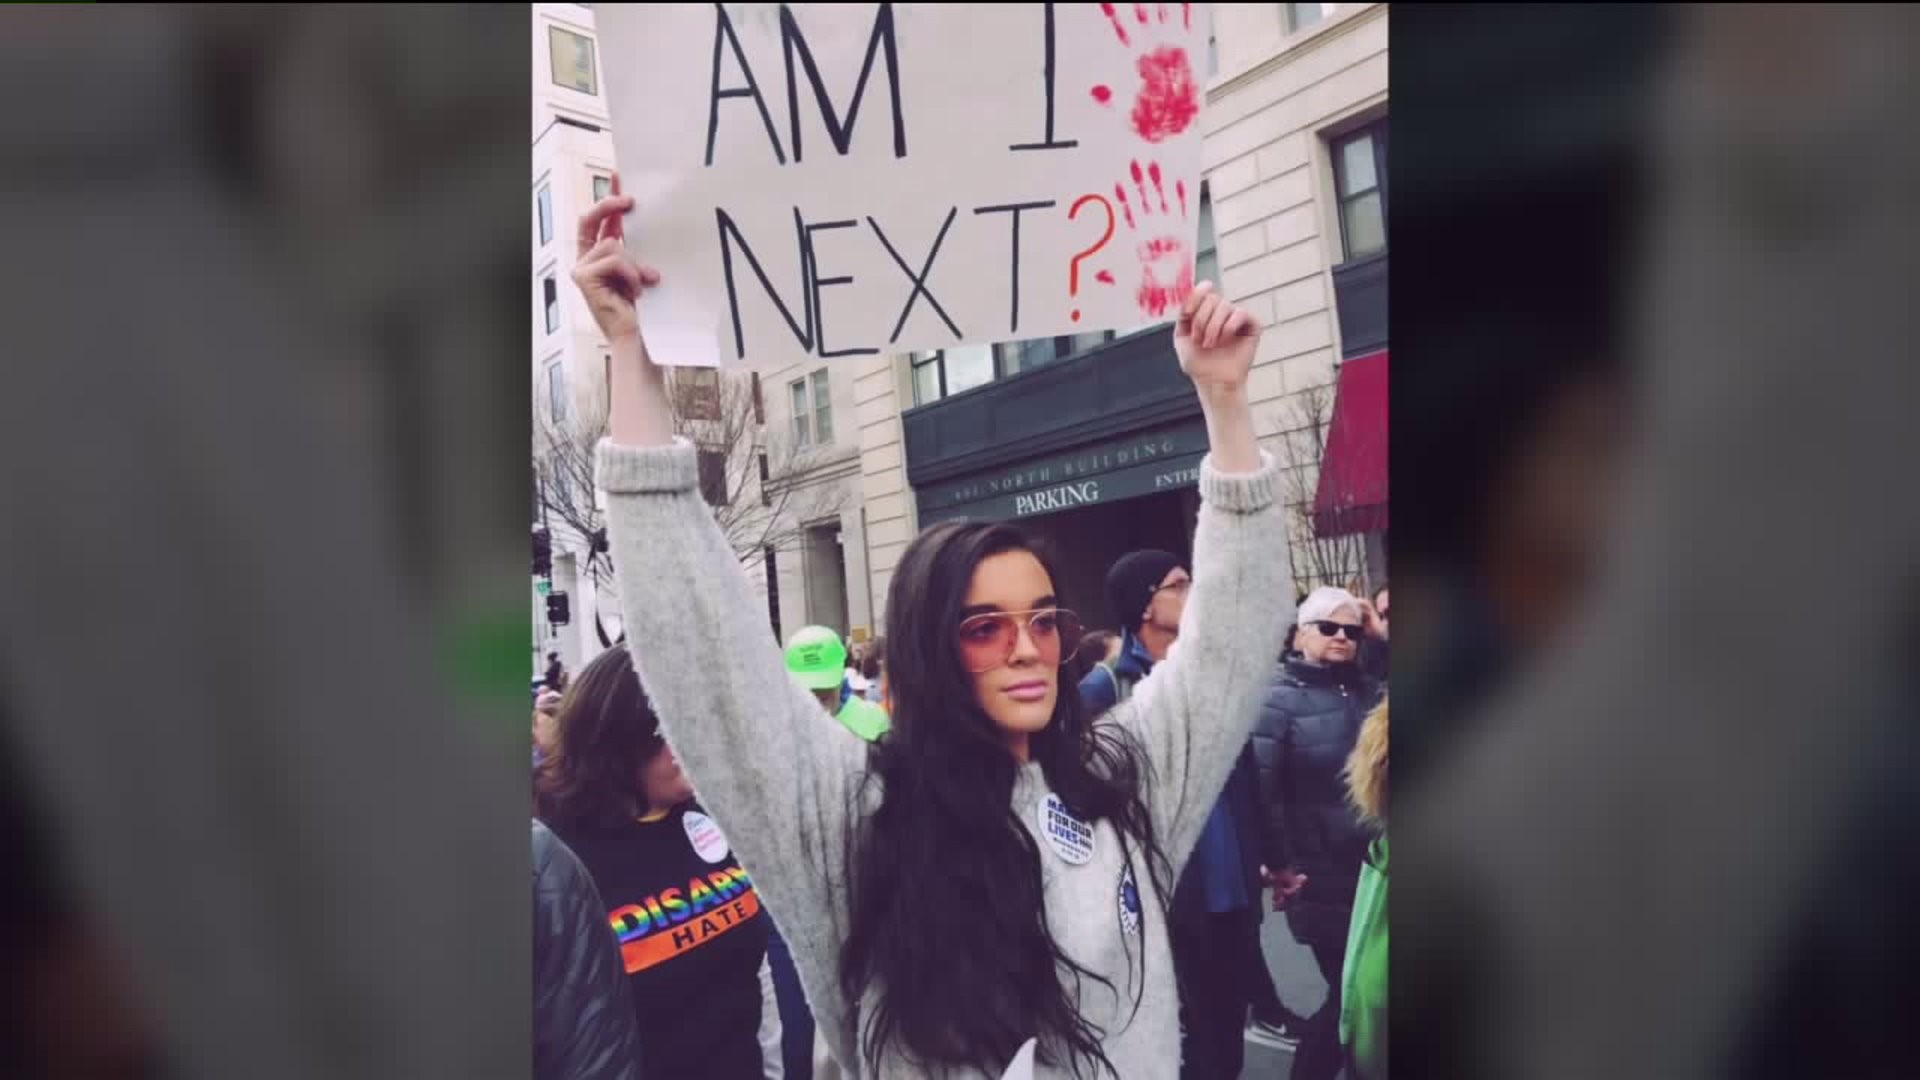 Students Inspired by March for Our Lives